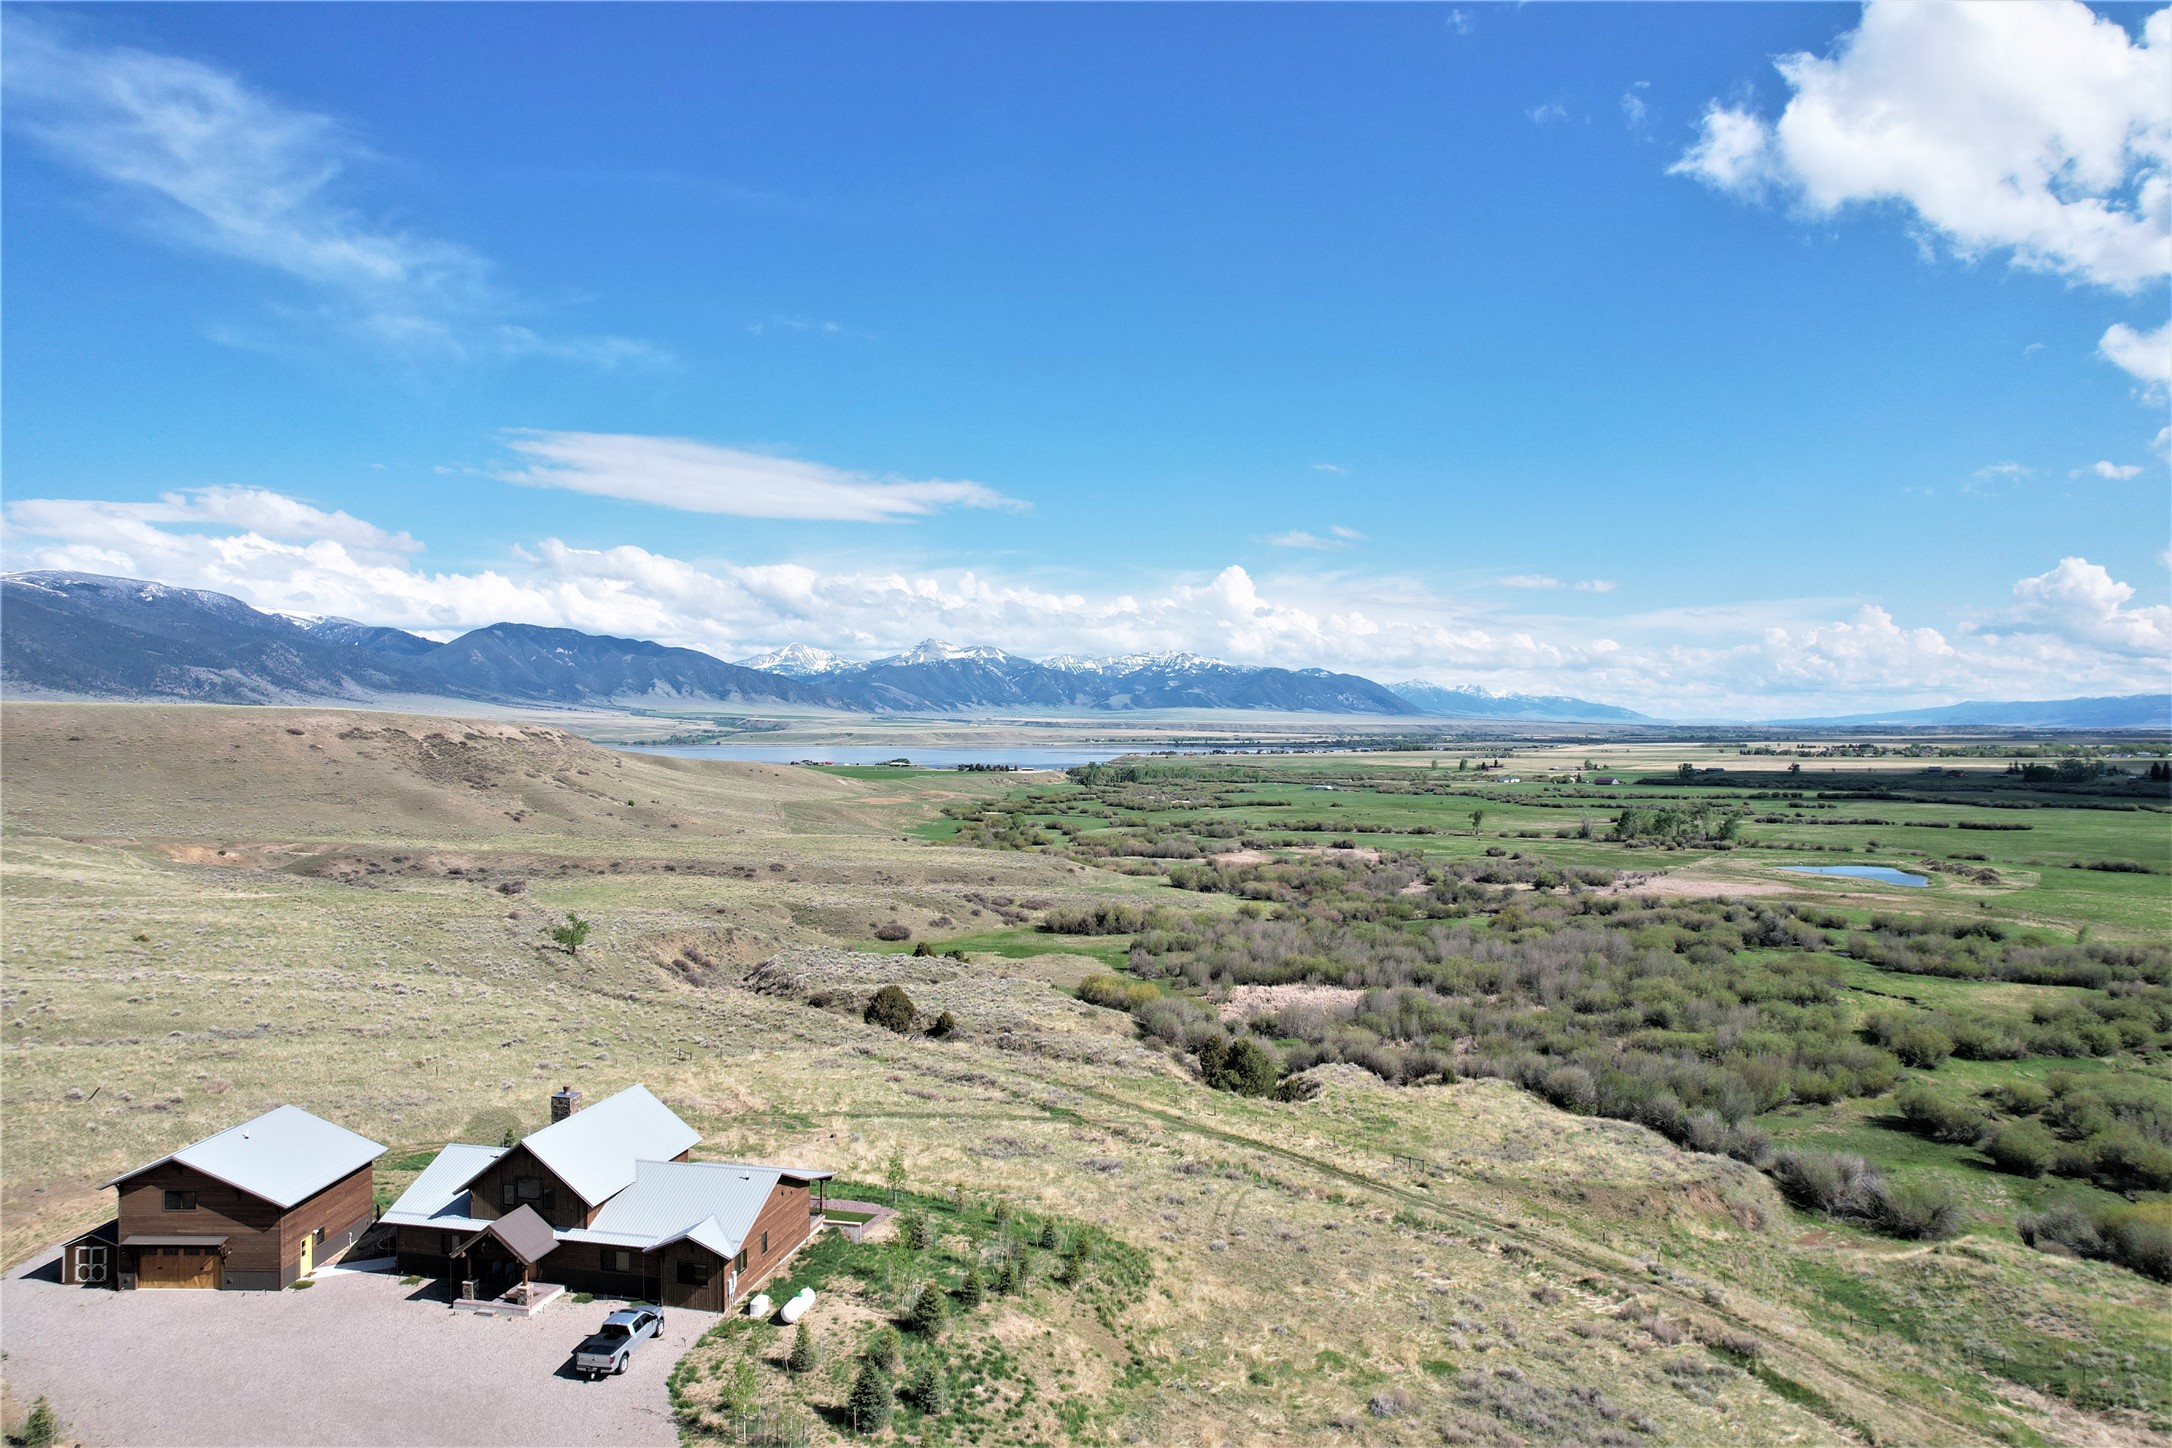 Black Barrel Ranch is located less than an hour to Bozeman and features 5 bedrooms and 3.5 baths in this beautiful custom home plus there is a detached guest apartment over a 3 car garage. All of this is situated on 150+/- acres (2 parcels allowing a new Buyer even more flexibility) looking south down the famed Madison Valley to the Yellowstone National Park caldera on a clear day. Ringed by three mountain ranges (The Madisons, the Tobacco Roots, and the Gravellys) this home can be the center of your recreational lifestyle. Bring your binoculars to watch the wildlife (moose, deer, antelope, blue heron & more) as they drink from your private pond just south of the house. This property is NOT encumbered by covenants, zoning, nor conservation easement giving you the perfect opportunity to bring your horses, cattle, chickens and any other animals to create your very own small ranch. The guest apartment could also be a perfect place for a caretaker. Enjoy your evenings watching Alpen glow cover the mountains from large deck or cozy up in front of the wood burning stack rock fireplace as you soak in the quiet and solitude that living in the mountains can bring. Hiking, hunting, fishing are all out your door or take a quick drive for winter snow-skiing (3 major hills within 2 hours) or bring your boat and hit Ennis Lake. In Montana you don't just buy a property......you purchase a new lifestyle. If you are looking for the Montana Dream then be sure to see this one!